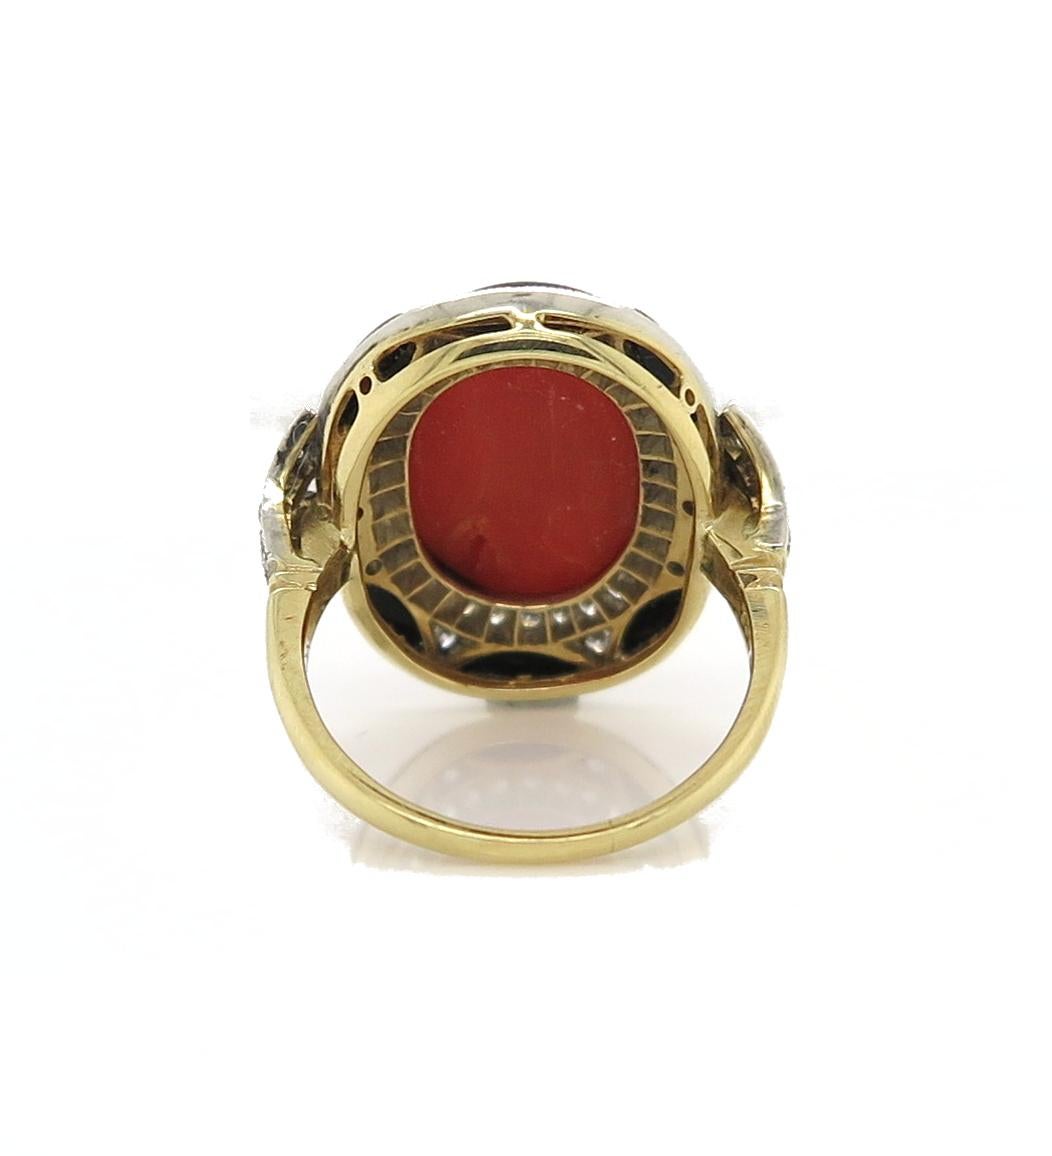 A unique cabochon-cut 9.37 carat Coral stands out in a vibrant red, framed by beautiful Onyx and Diamonds. A total of fifty-six diamonds are showcased surrounding the central stone and the shank, equating to 0.85 carat. Crafted in 18 carat white and